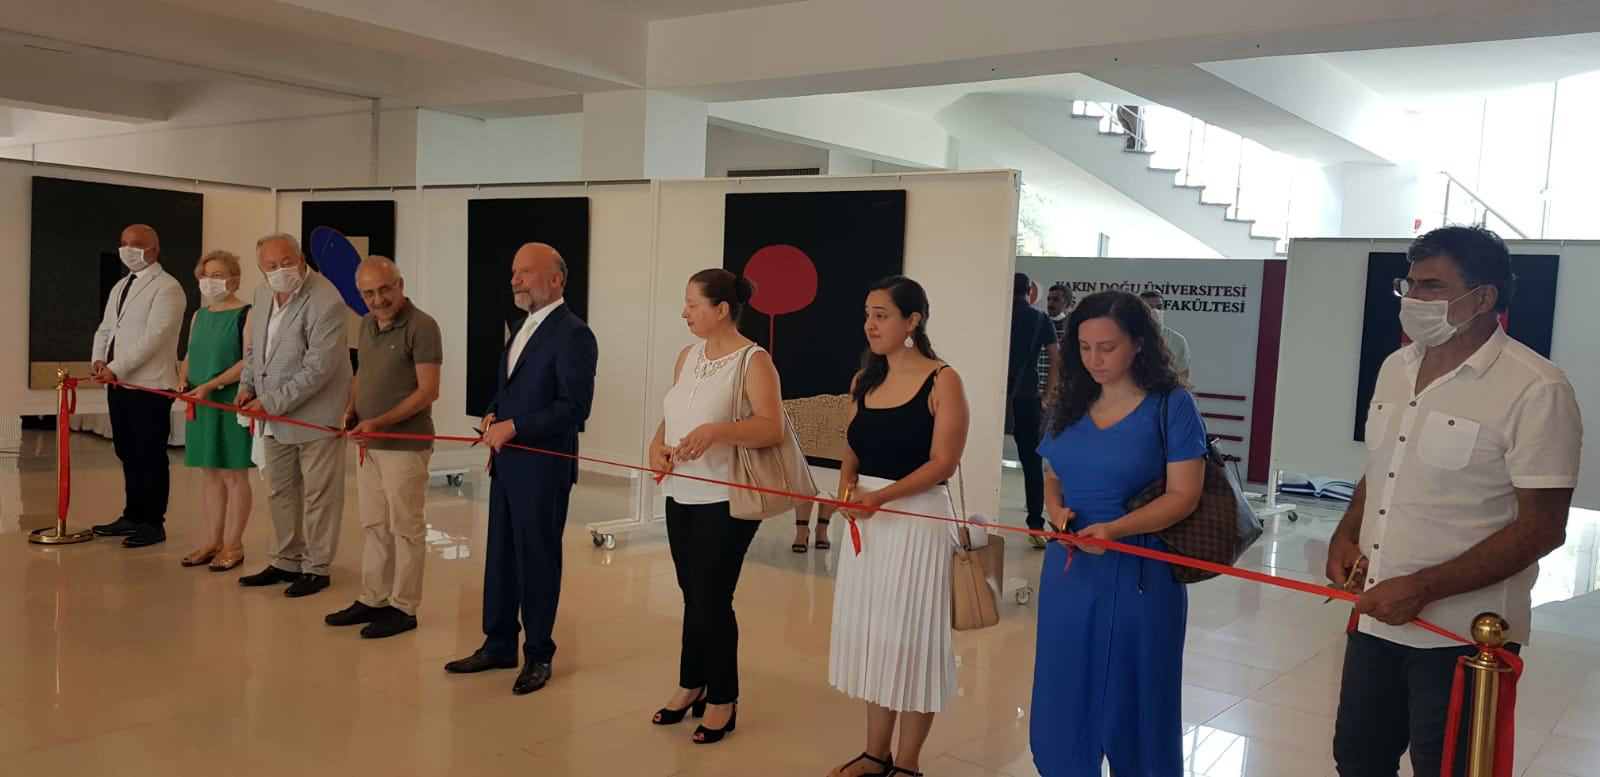 Turkish Cypriot Artist Osman Atila Keten’s solo exhibition titled “Touching Existence” and consisting of 27 paintings and 4 sculptures opened for the Cyprus Museum of Modern Arts